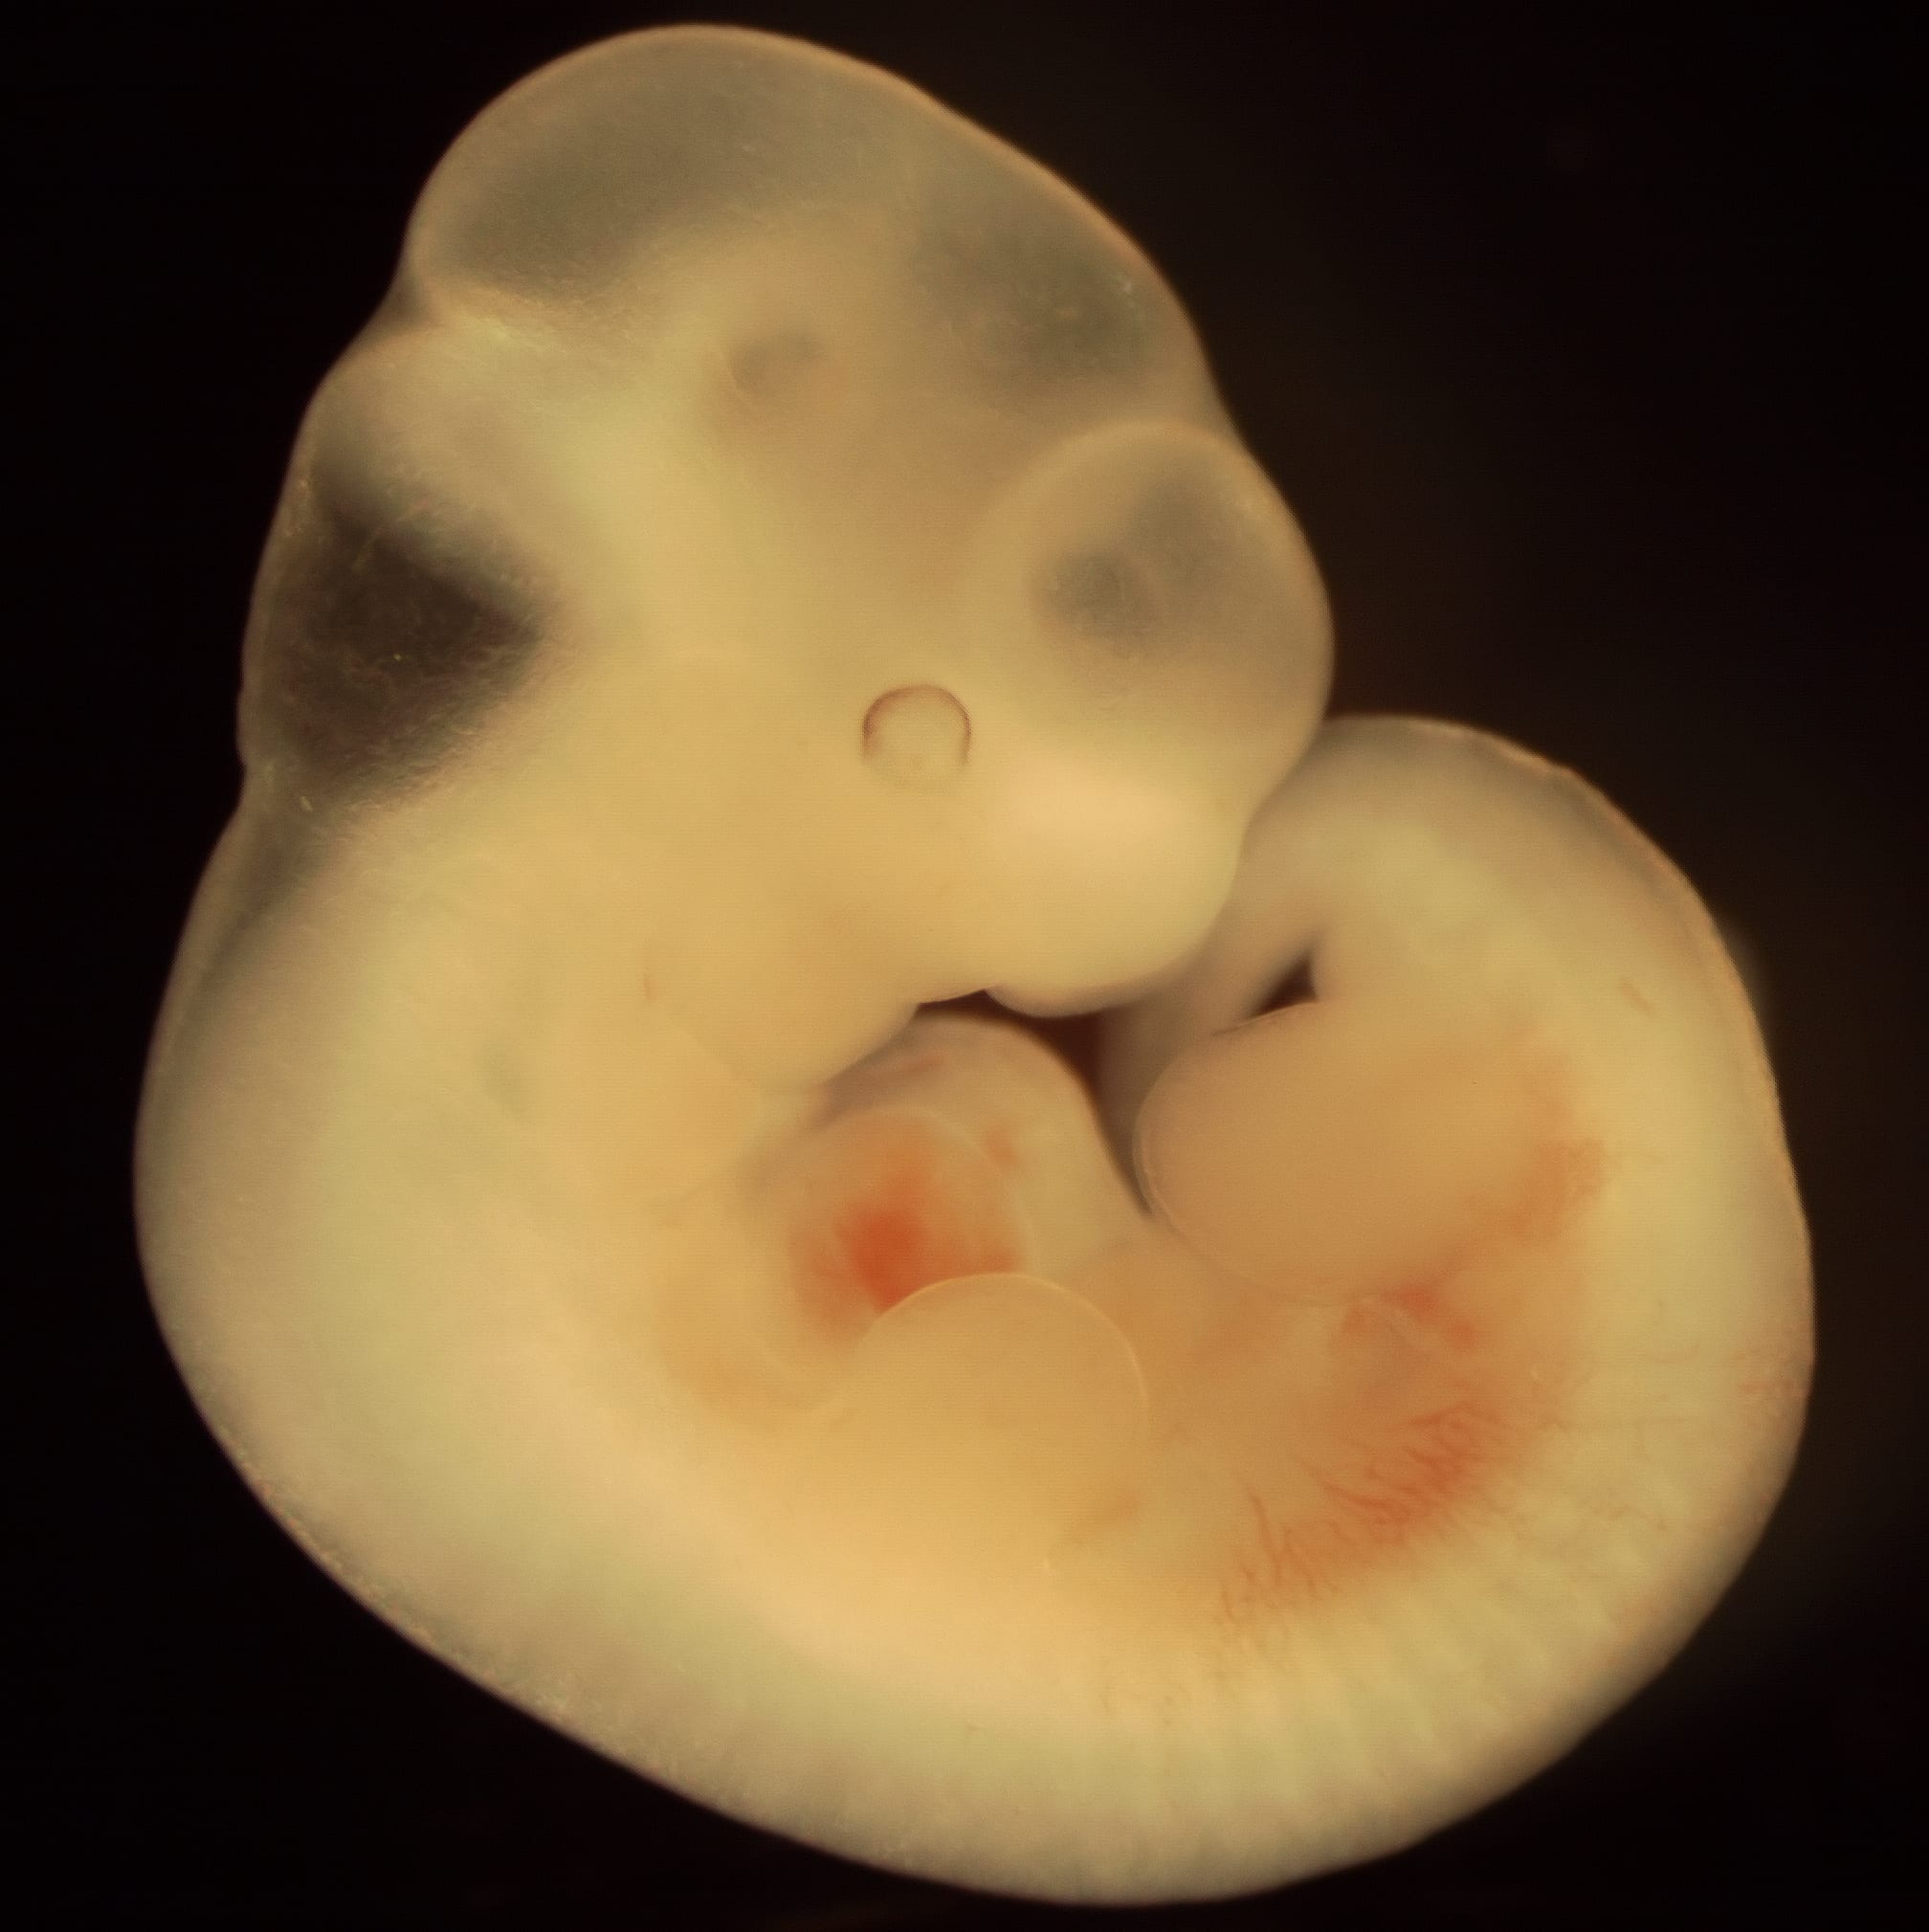 Scientists experiment by creating animal embryos and